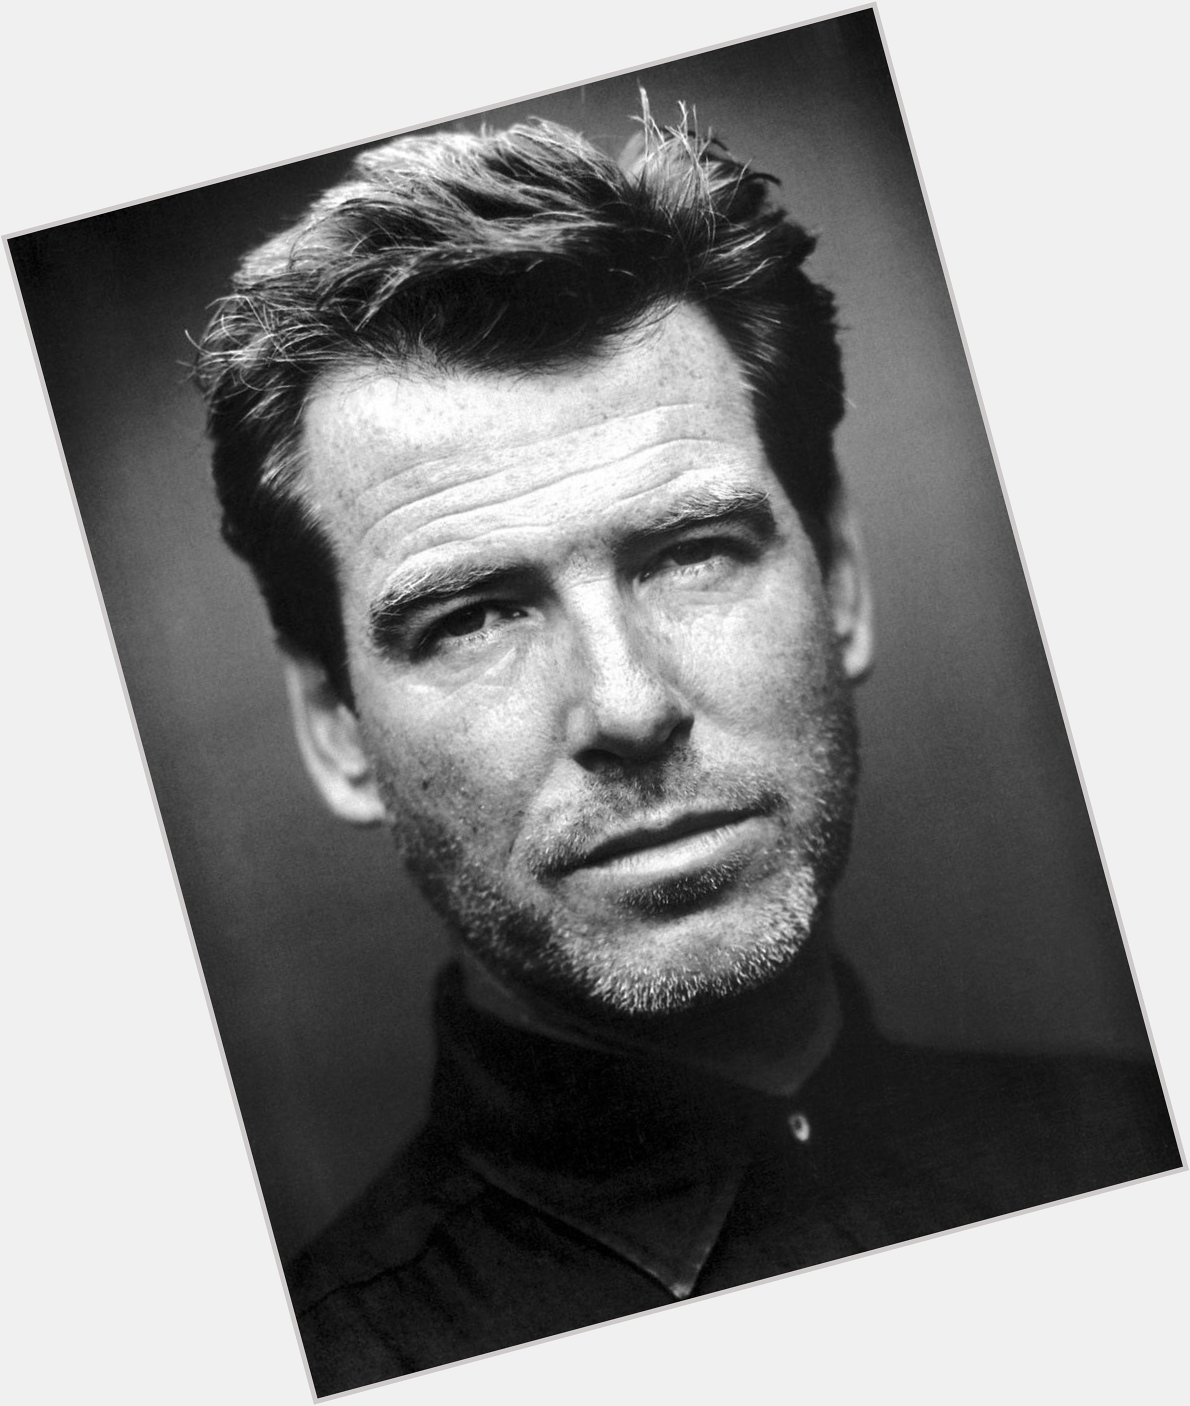 Happy birthday Pierce Brosnan! Looking studly and buff as ever at 62. Many happy returns, Mr Bond. 